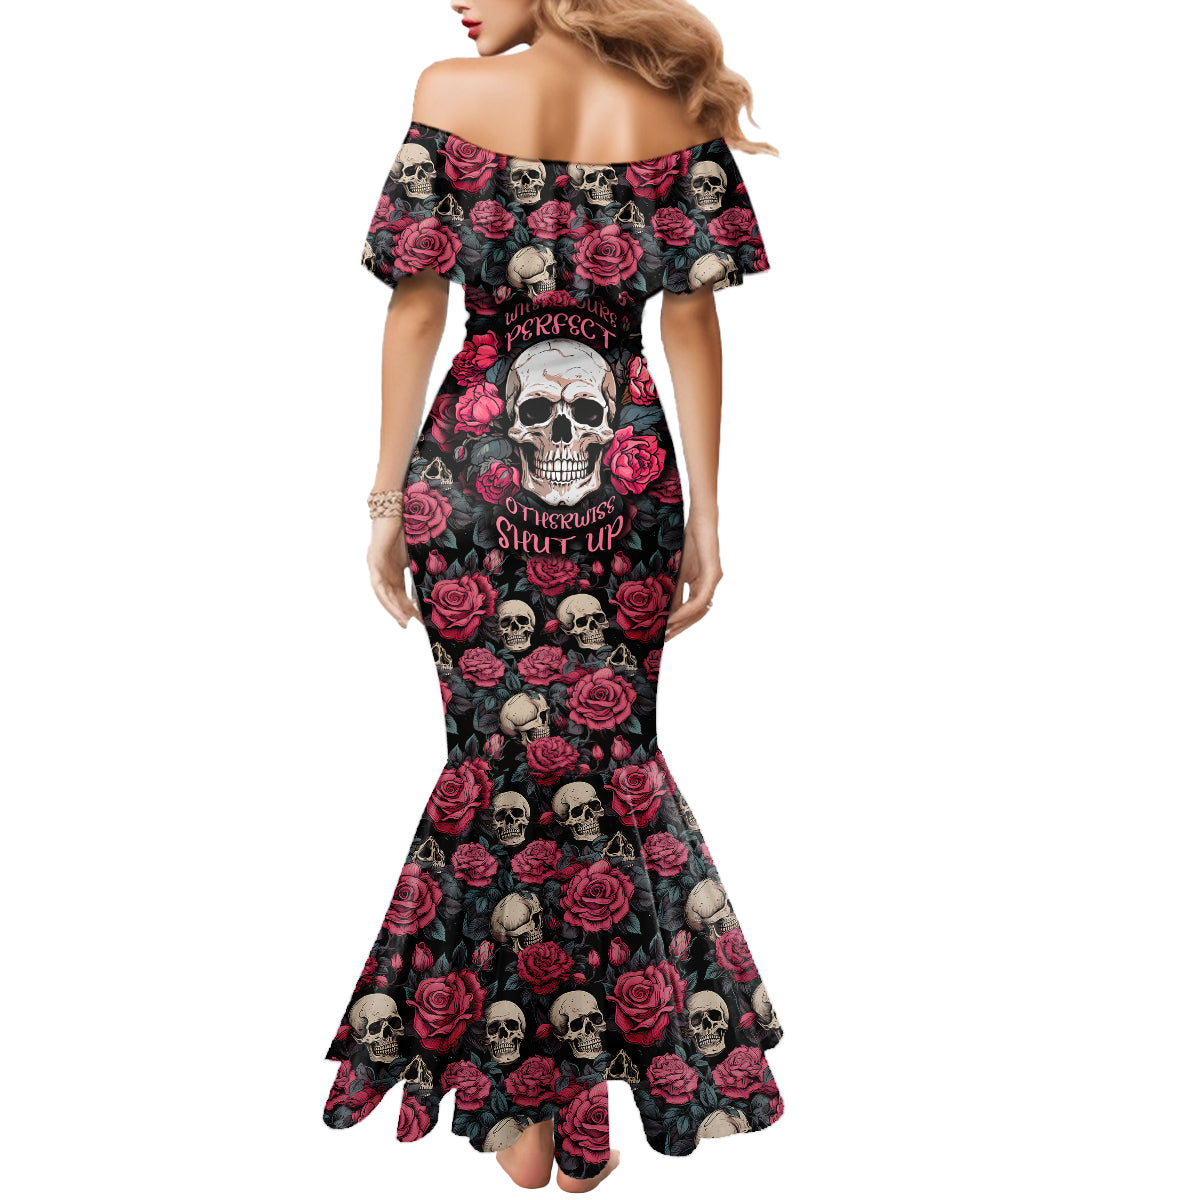 judge-me-when-yours-perfect-otherwise-shut-up-skull-mermaid-dress